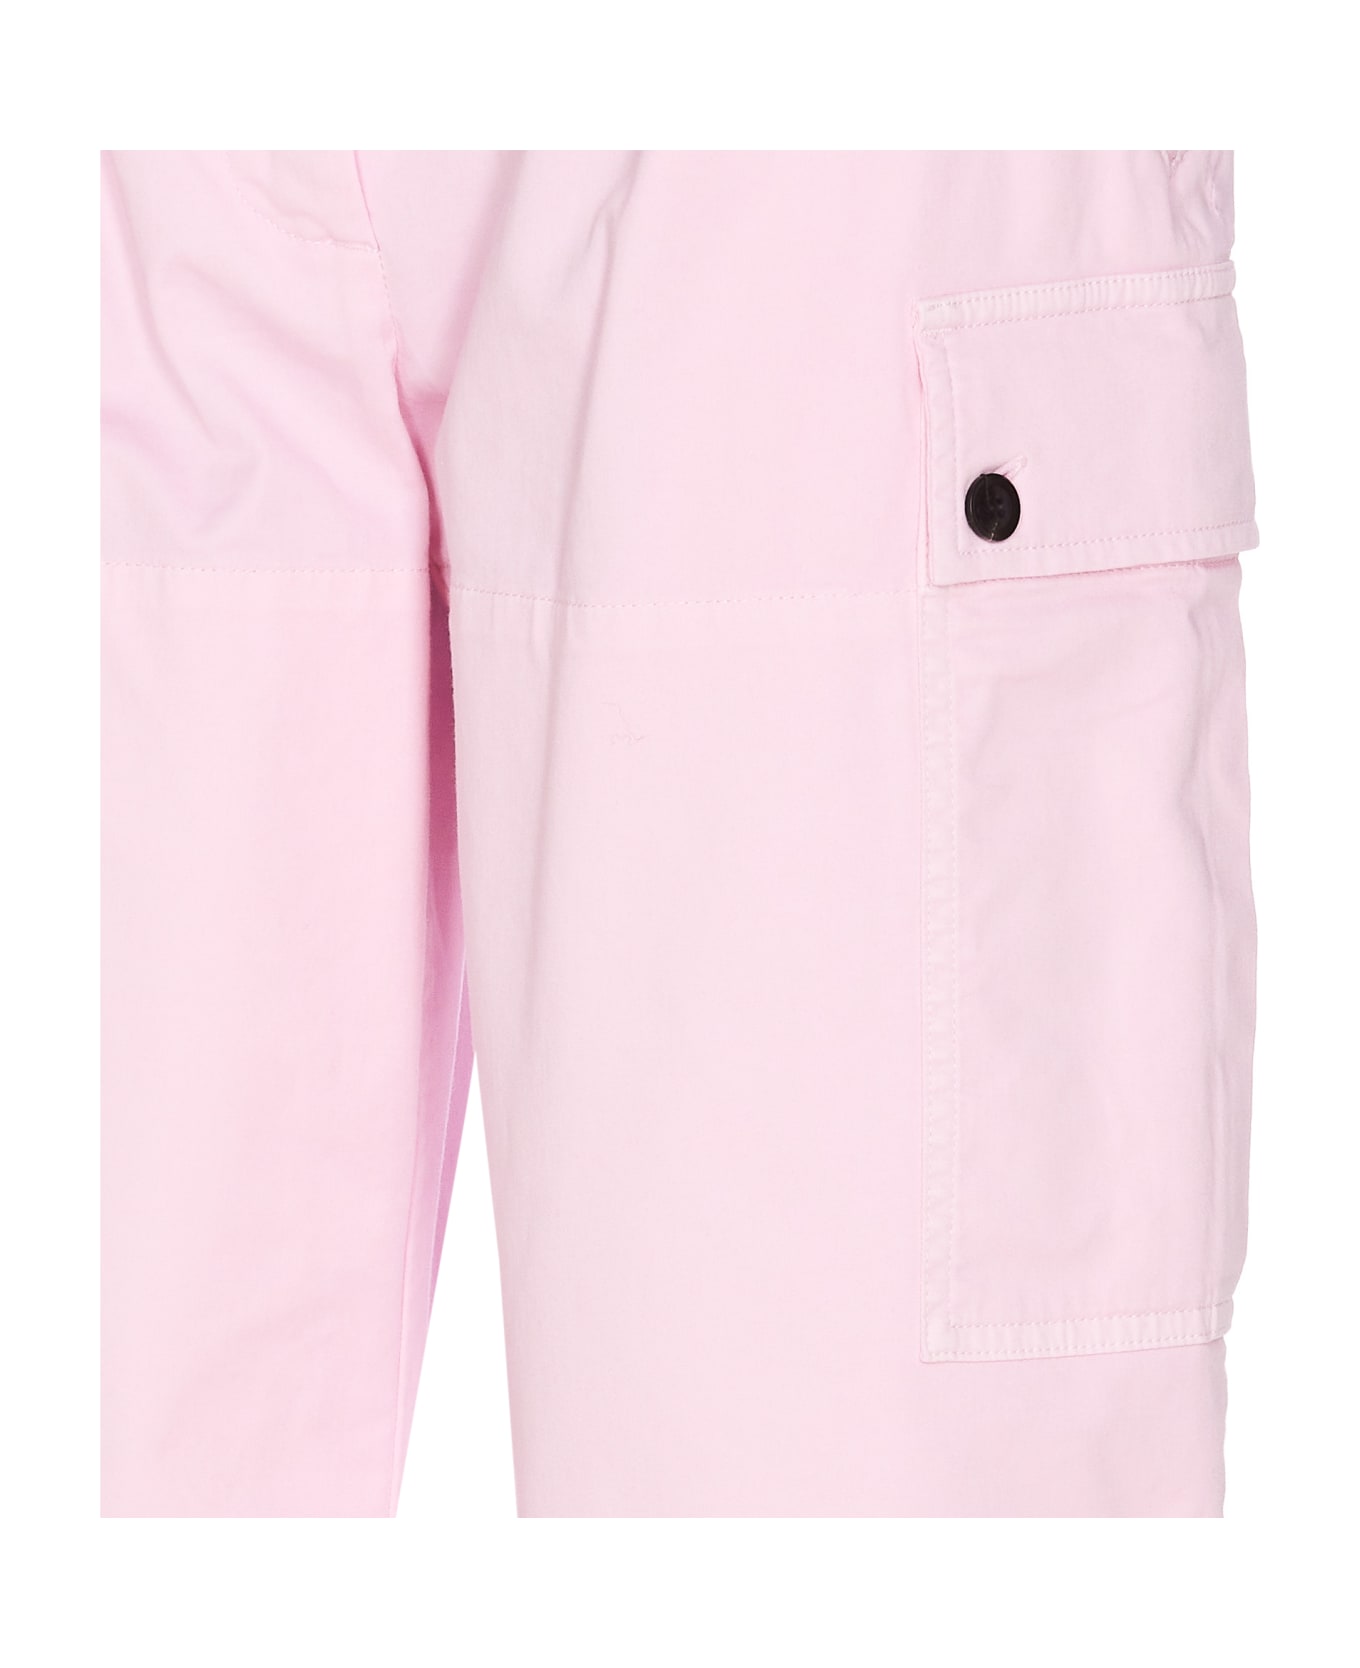 Tom Ford Cargo Pants - Pink